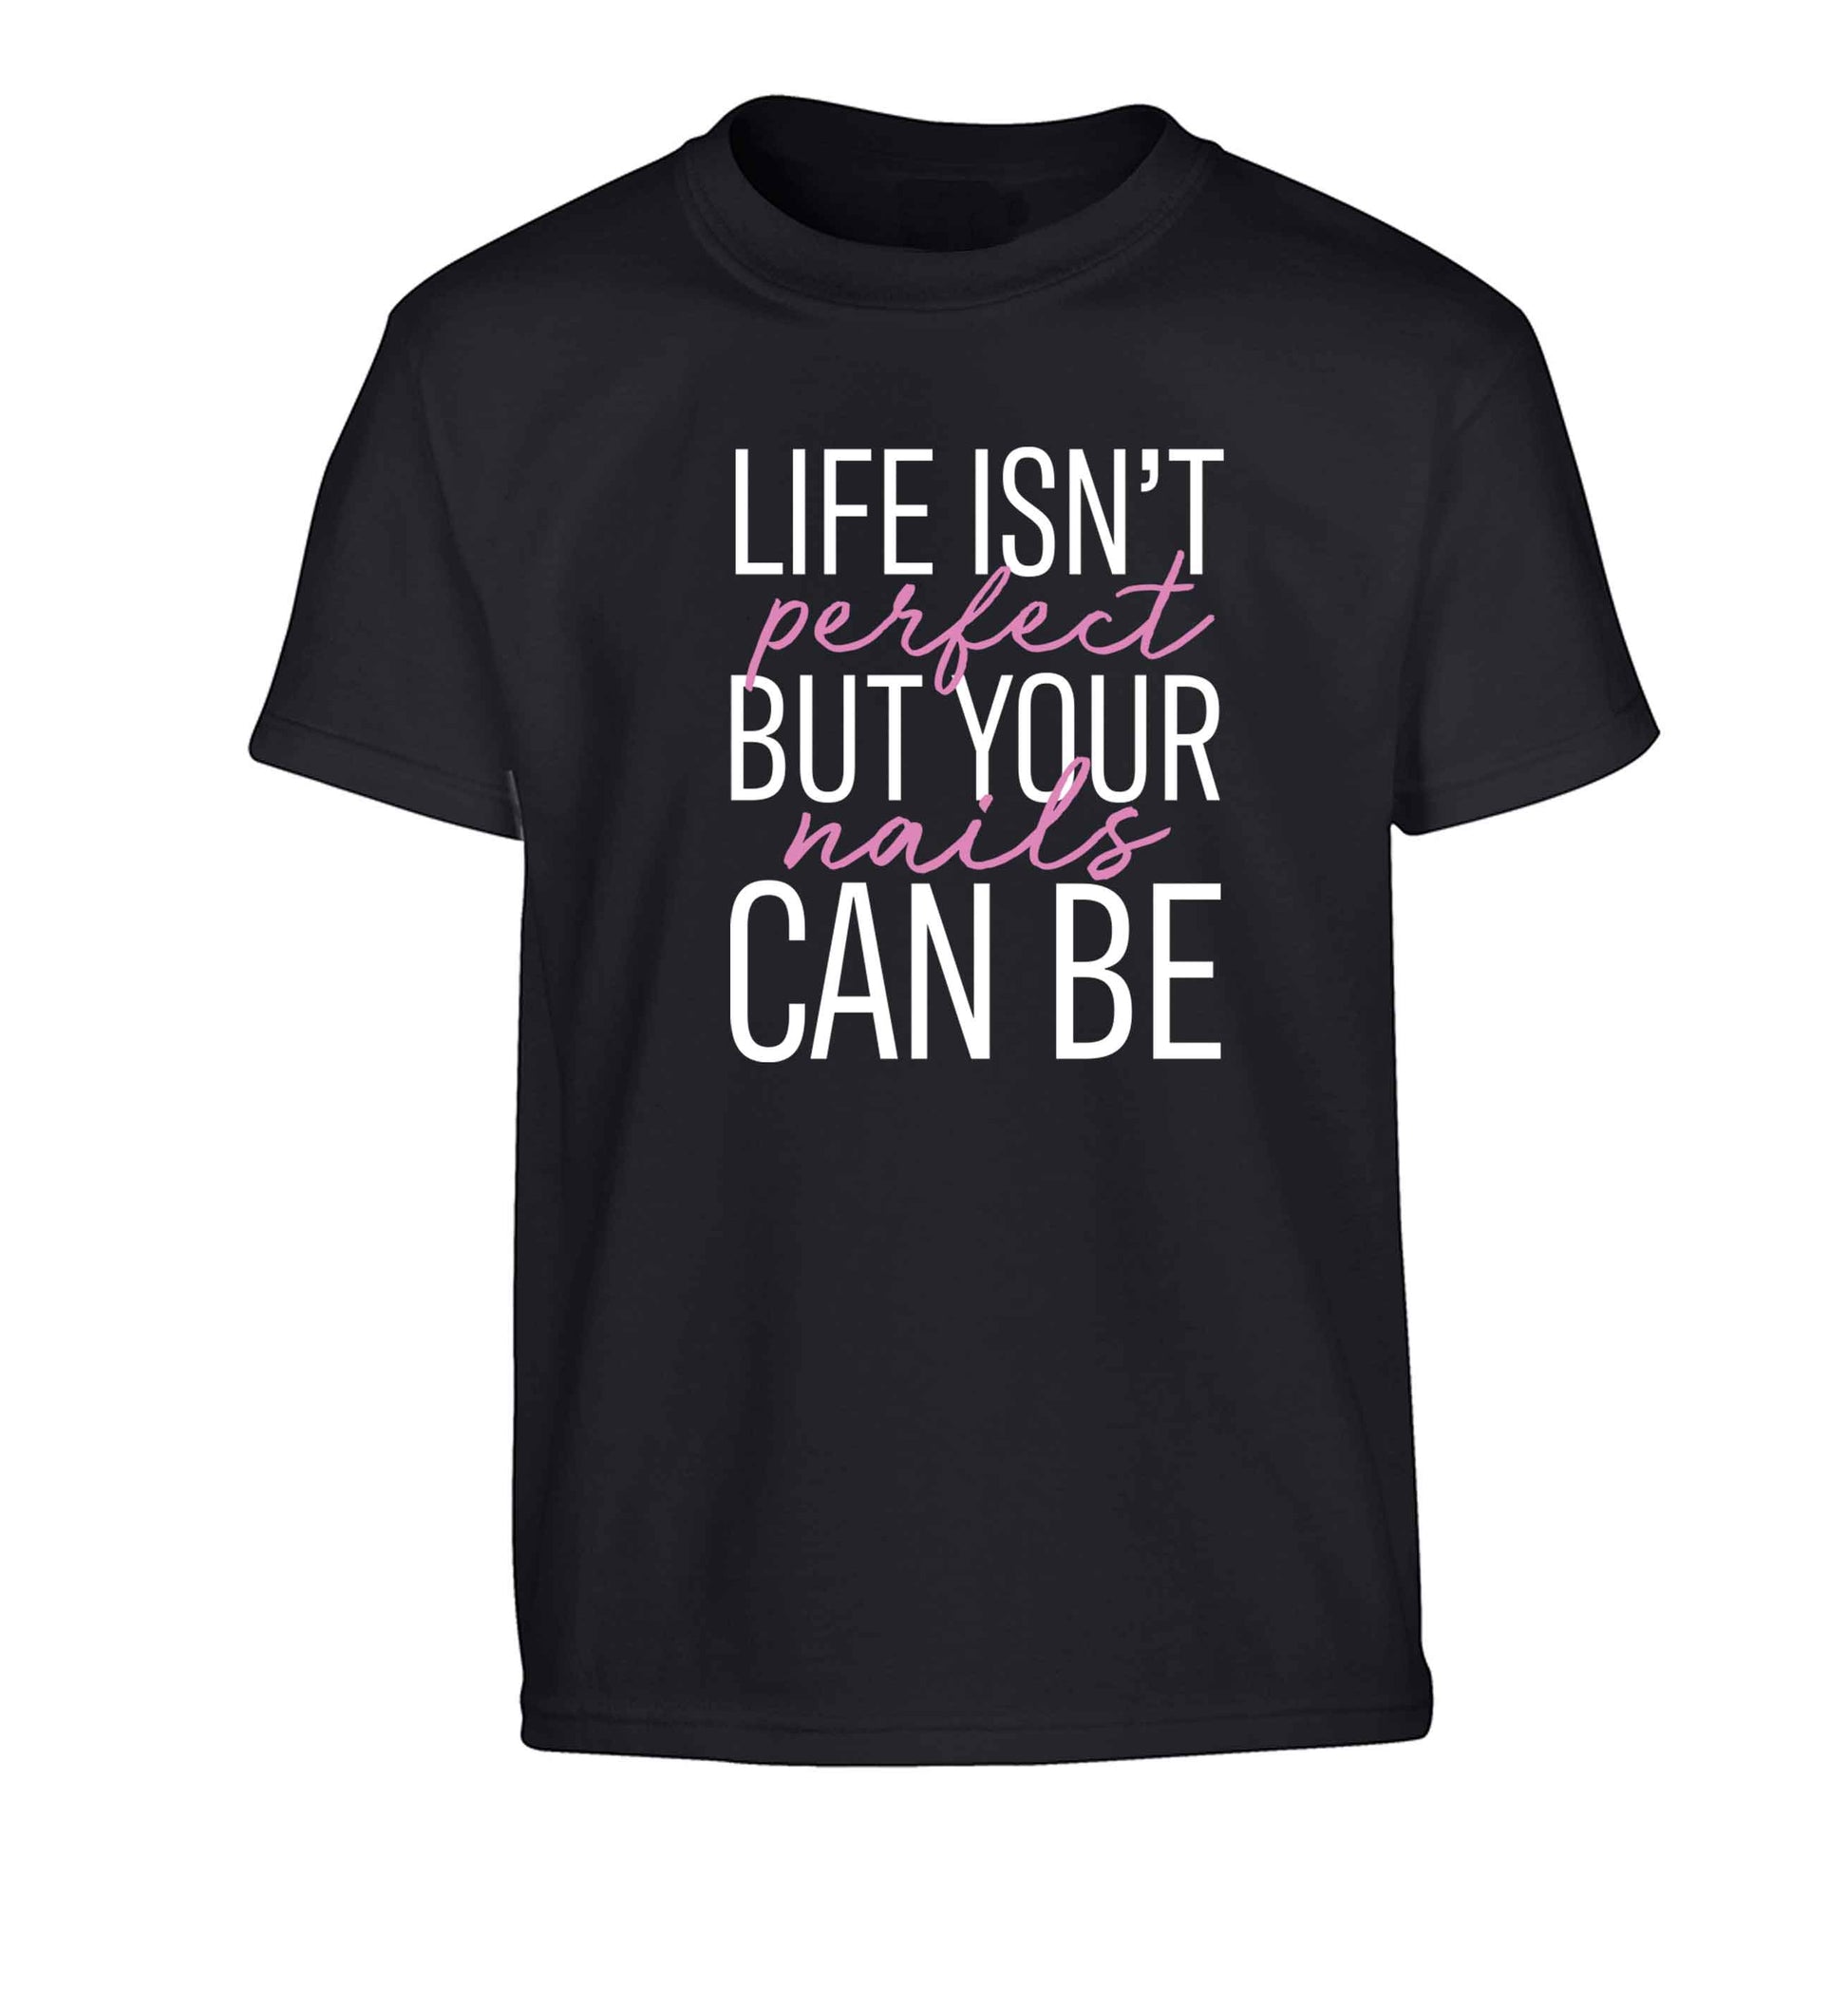 Life isn't perfect but your nails can be Children's black Tshirt 12-13 Years